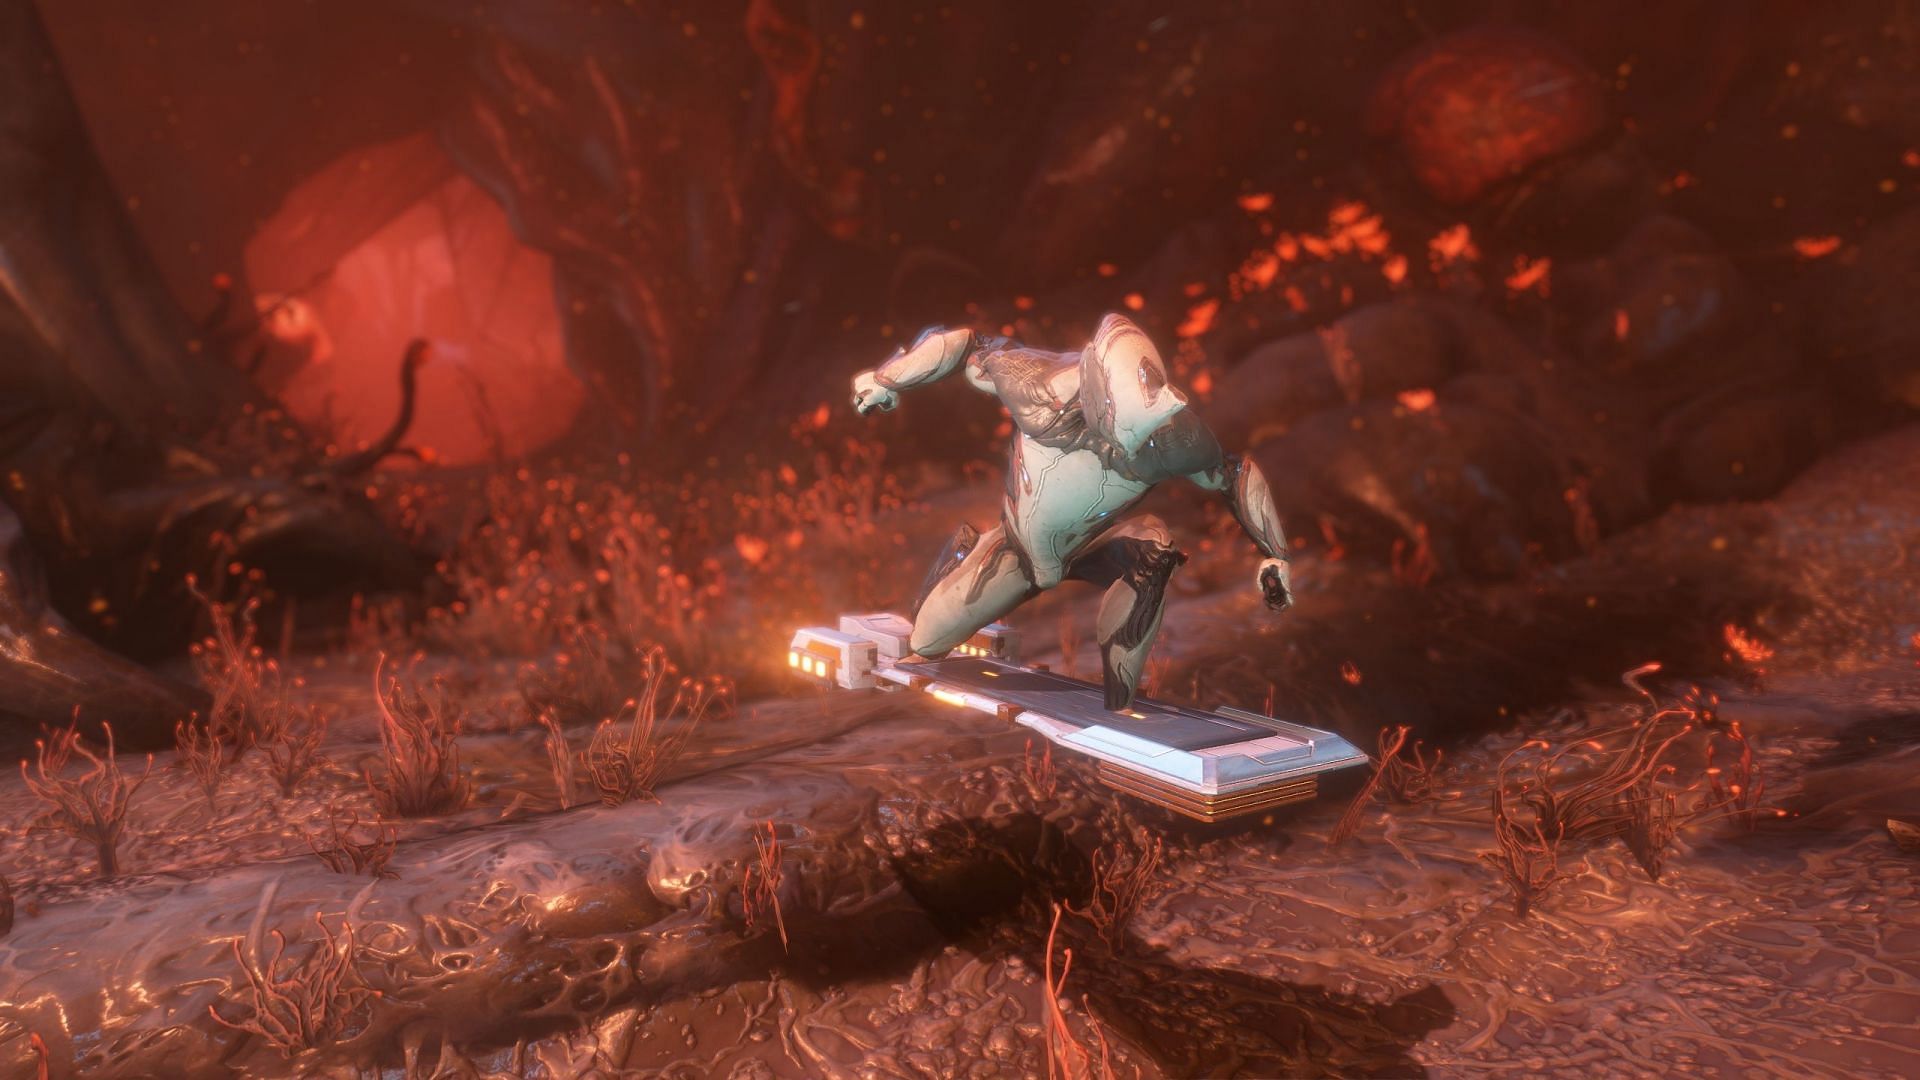 K-Drives are the skateboards of Warframe (Image via Digital Extremes)